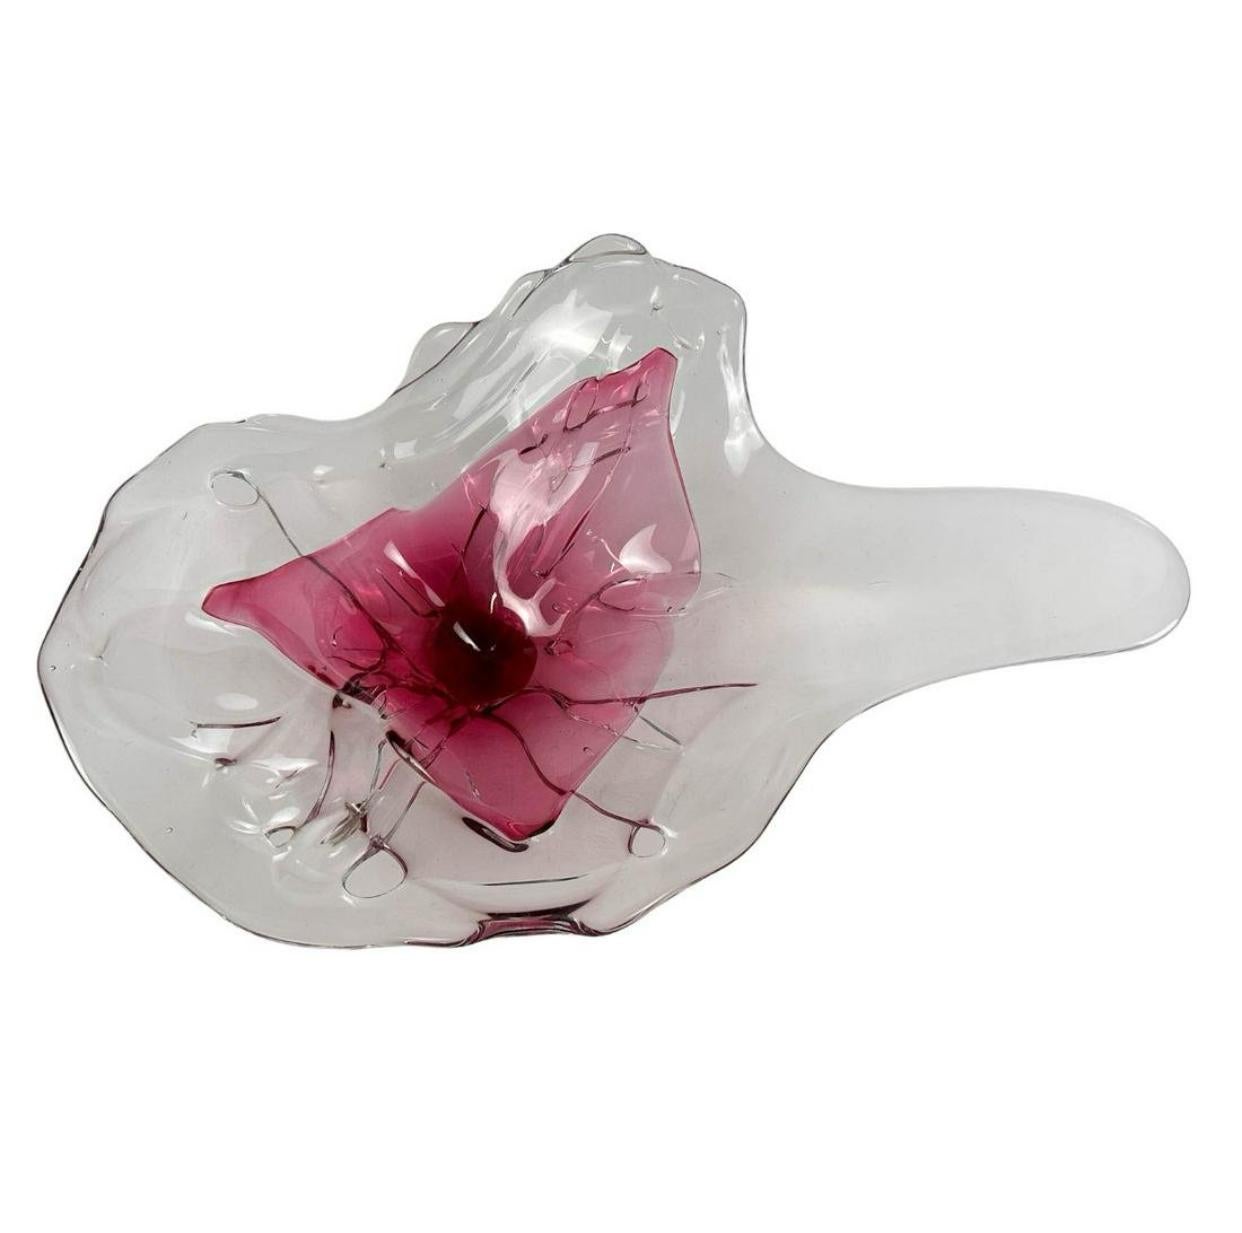 Studio artisan hand blown organic inspired biomorphic shaped centerpiece two color glass bowl. Modeled with an internally cased pink raspberry form encased within clear crystal. Signed with engraved artist name on the underside and dated 1960.